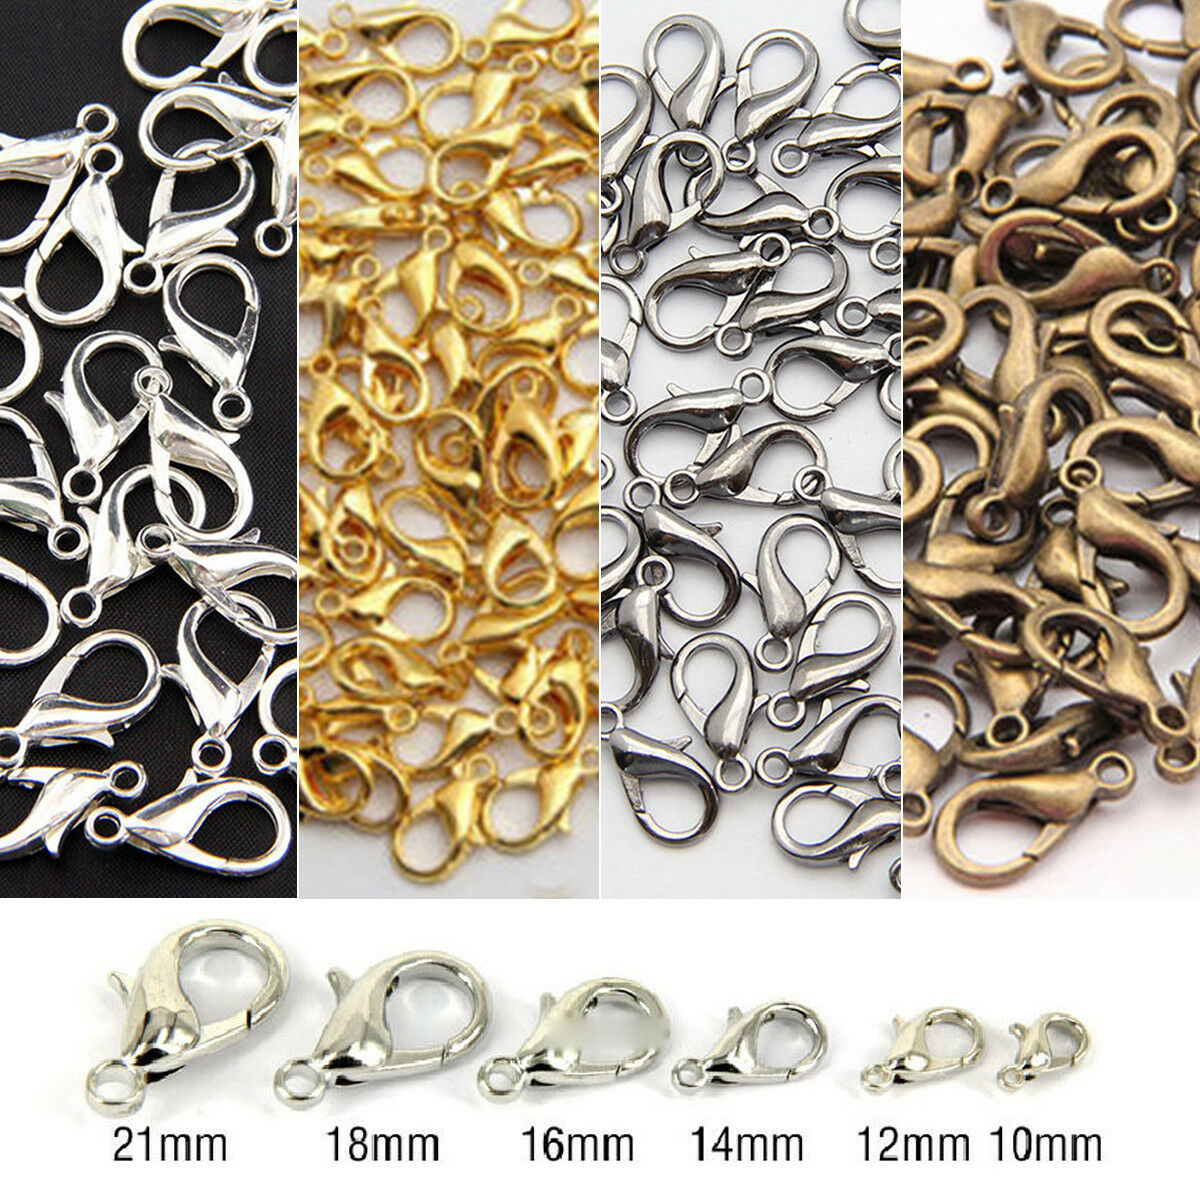 100PCS Jewelry Loose Lobster Claw Clasp Necklace Bracelet Making DIY 10/12/14mm